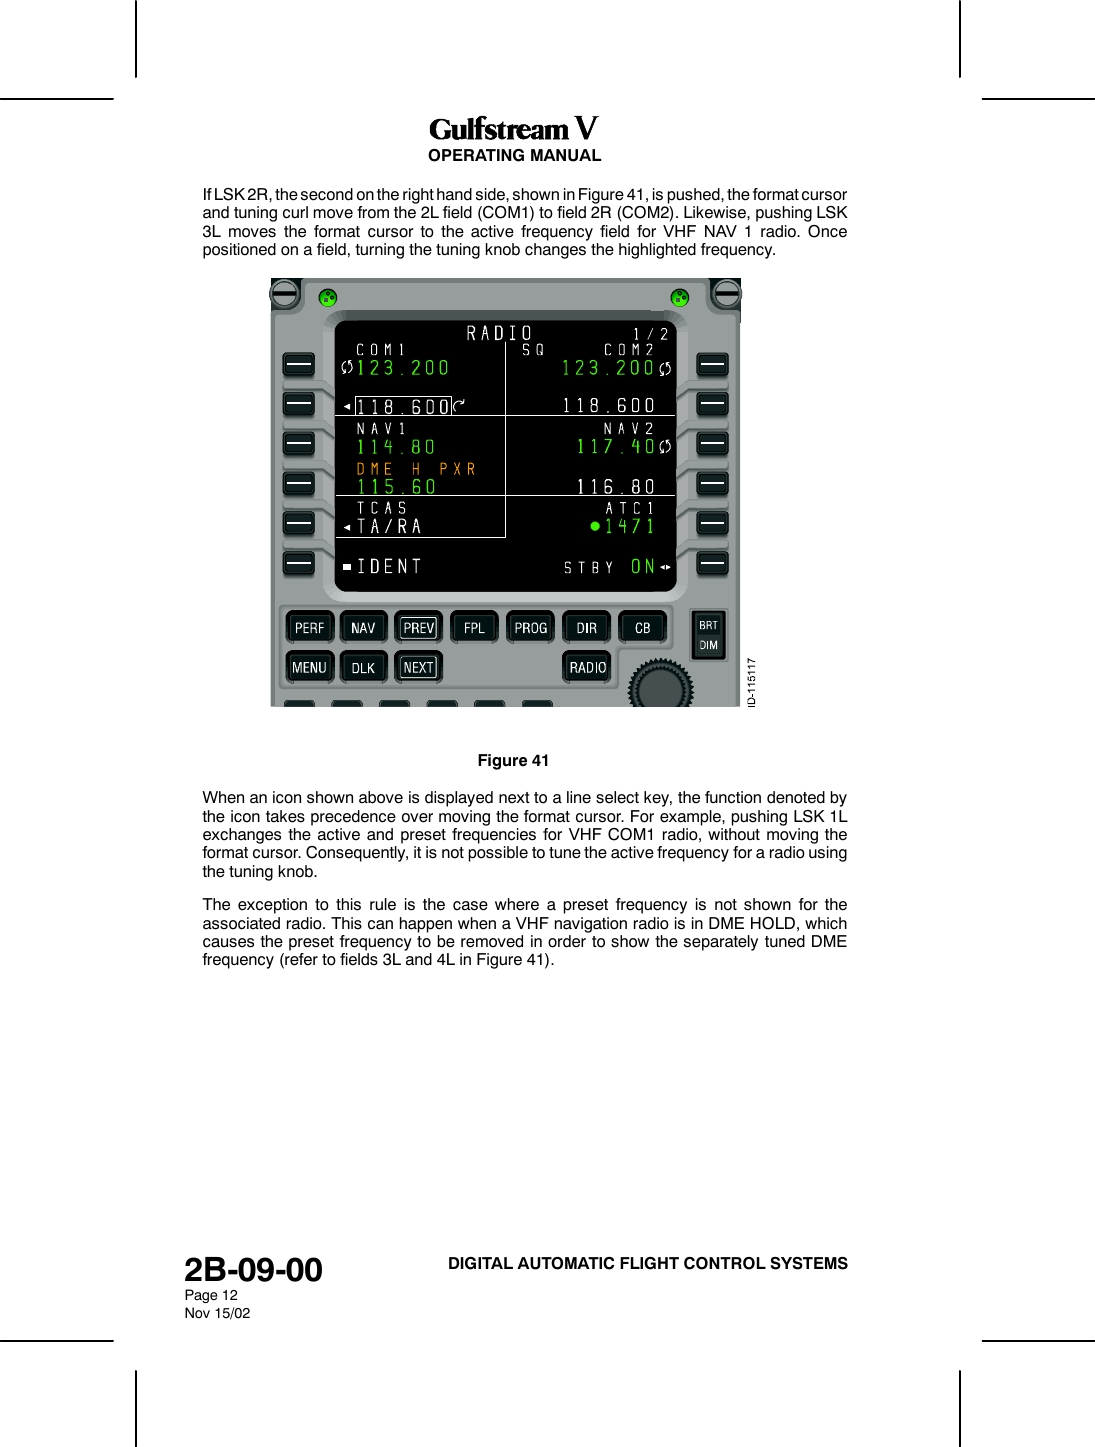 OPERATING MANUAL2B-09-00Page 12Nov 15/02DIGITAL AUTOMATIC FLIGHT CONTROL SYSTEMSIf LSK 2R, the second on the right hand side, shown in Figure 41, is pushed, the format cursorand tuning curl move from the 2L field (COM1) to field 2R (COM2). Likewise, pushing LSK3L moves the format cursor to the active frequency field for VHF NAV 1 radio. Oncepositioned on a field, turning the tuning knob changes the highlighted frequency.Figure 41When an icon shown above is displayed next to a line select key, the function denoted bythe icon takes precedence over moving the format cursor. For example, pushing LSK 1Lexchanges the active and preset frequencies for VHF COM1 radio, without moving theformat cursor. Consequently, it is not possible to tune the active frequency for a radio usingthe tuning knob.The exception to this rule is the case where a preset frequency is not shown for theassociated radio. This can happen when a VHF navigation radio is in DME HOLD, whichcauses the preset frequency to be removed in order to show the separately tuned DMEfrequency (refer to fields 3L and 4L in Figure 41).